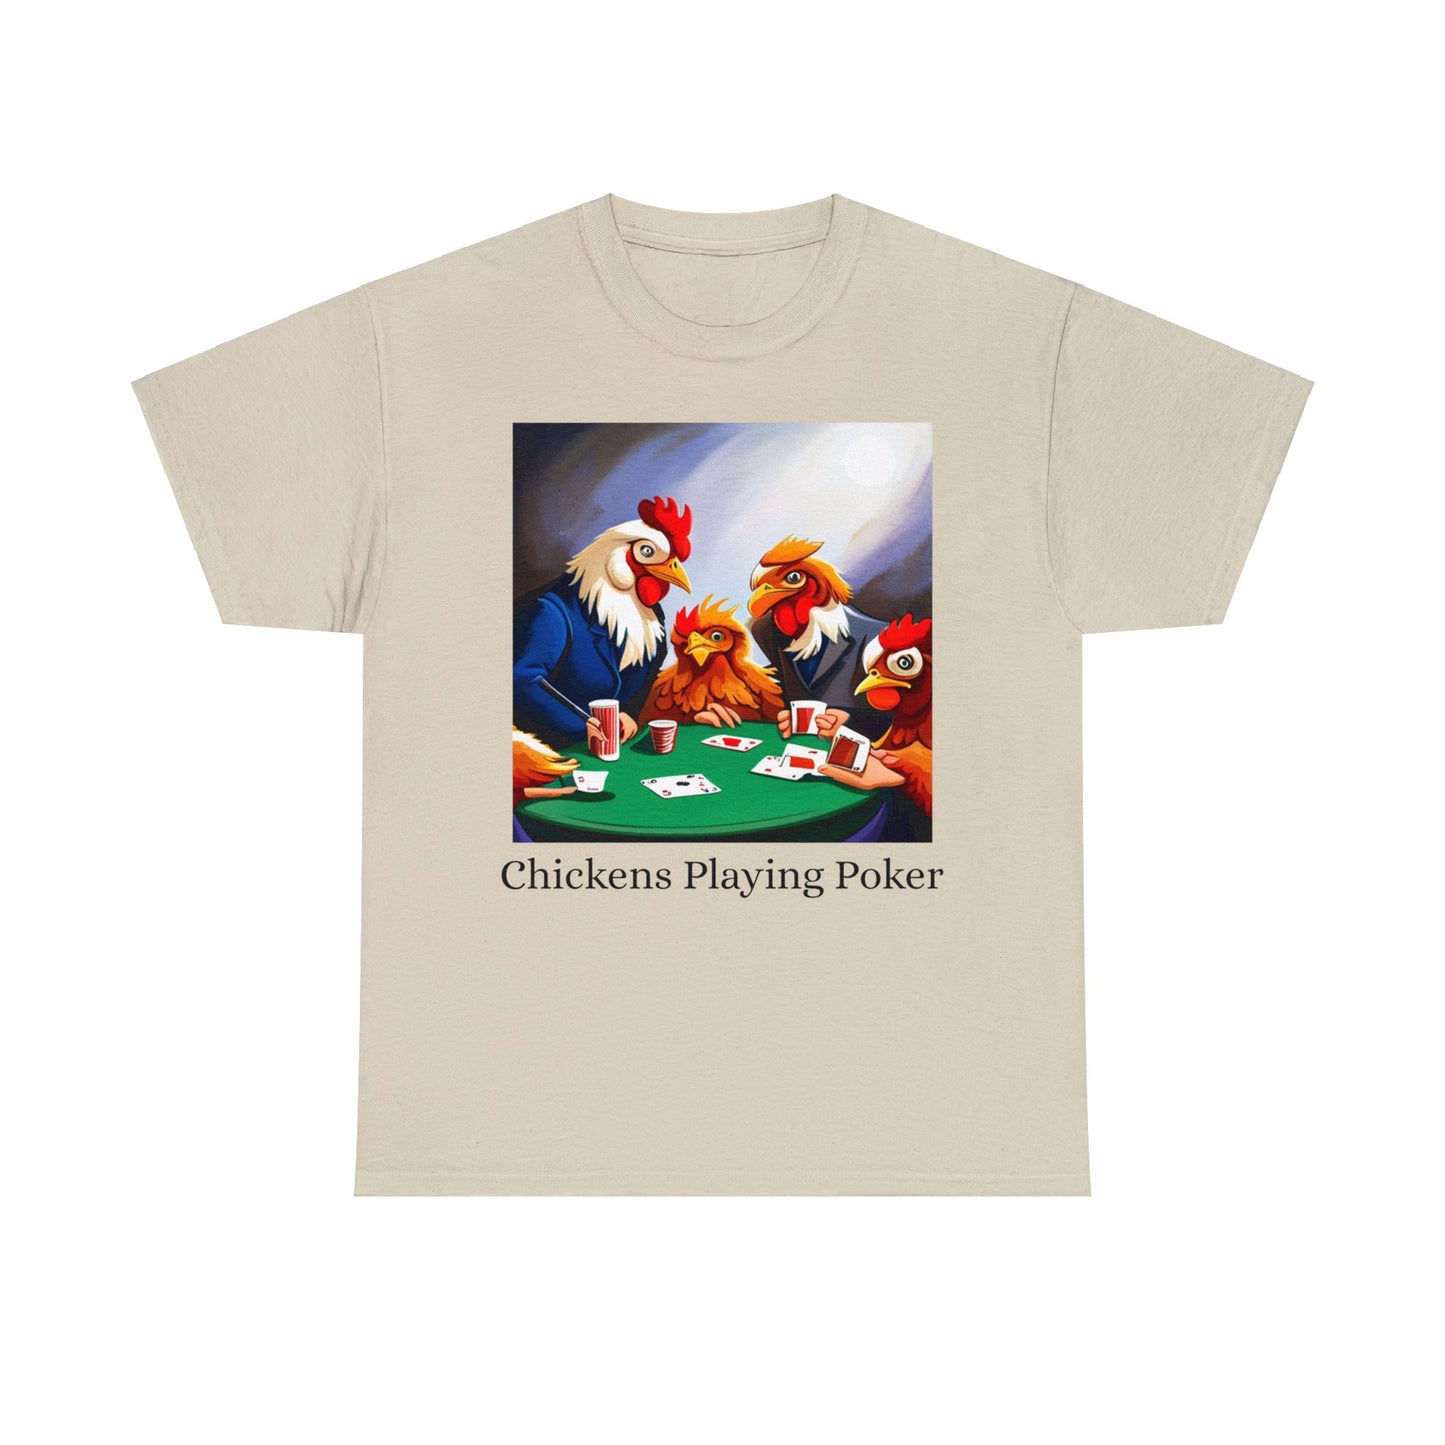 Chickens Playing Poker